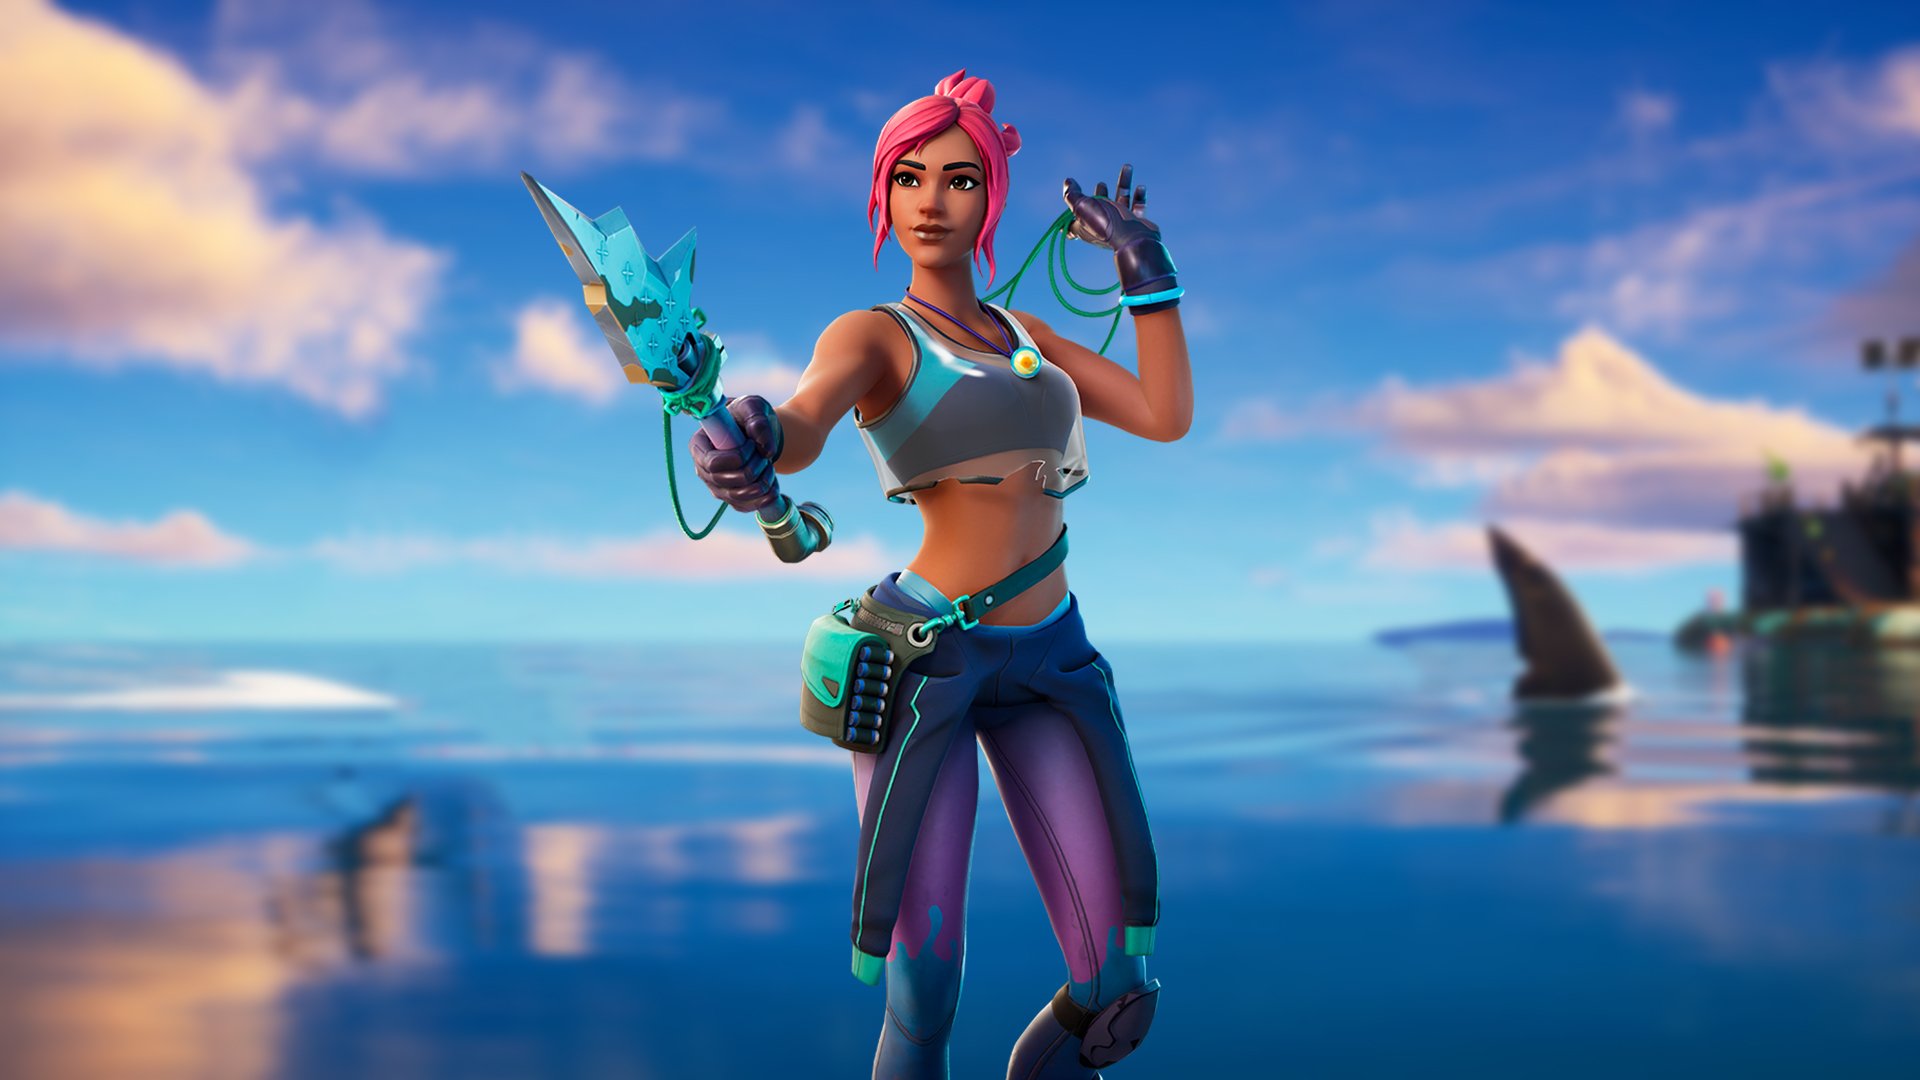 New Ocean Fortnite Skin Wallpapers Everything You Need to Know 1920x1080